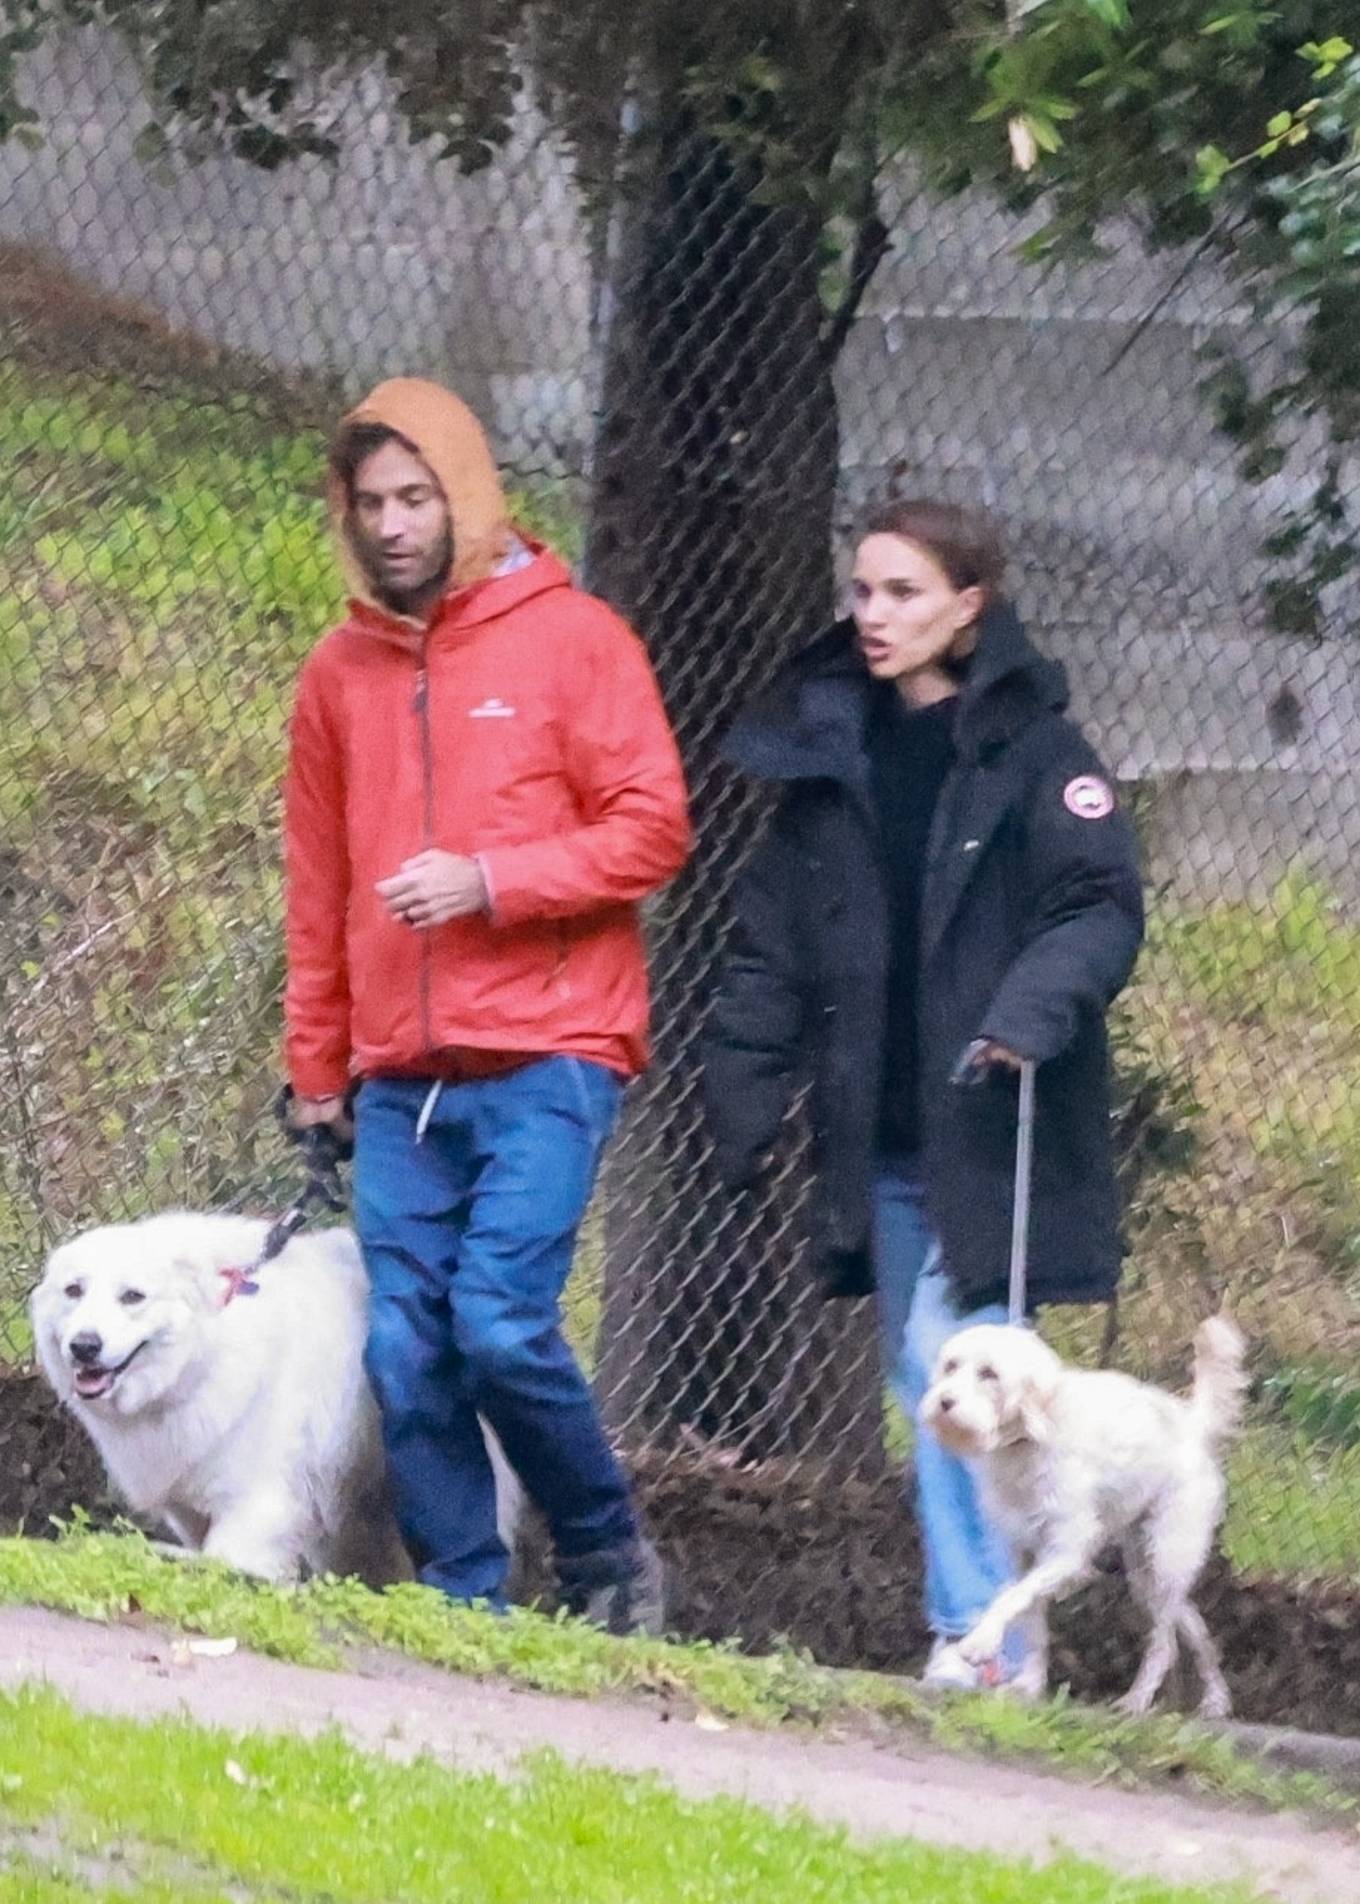 Natalie Portman - With Benjamin Millepied out for a hike at Griffith Park in Los Feliz